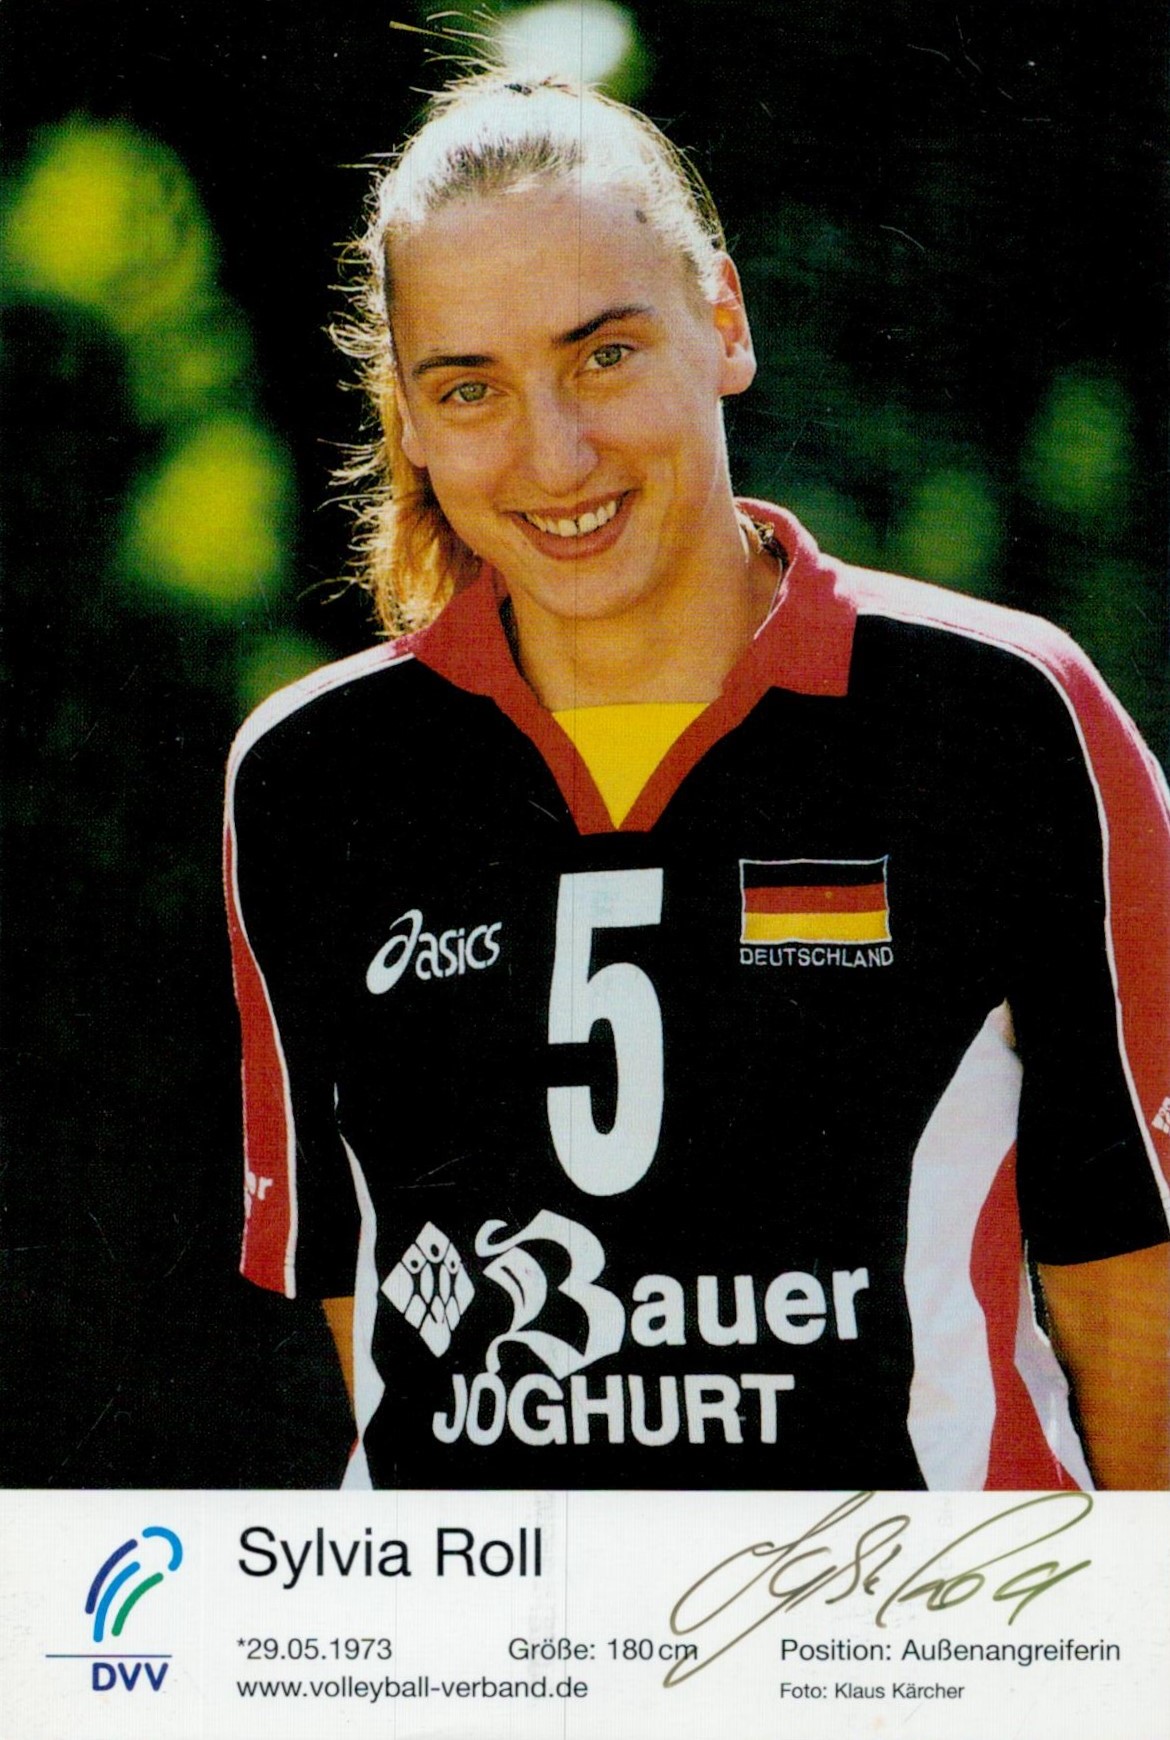 Sylvia Roll signed promo photo 6x4 Inch. Is a German former volleyball player. She was part of the